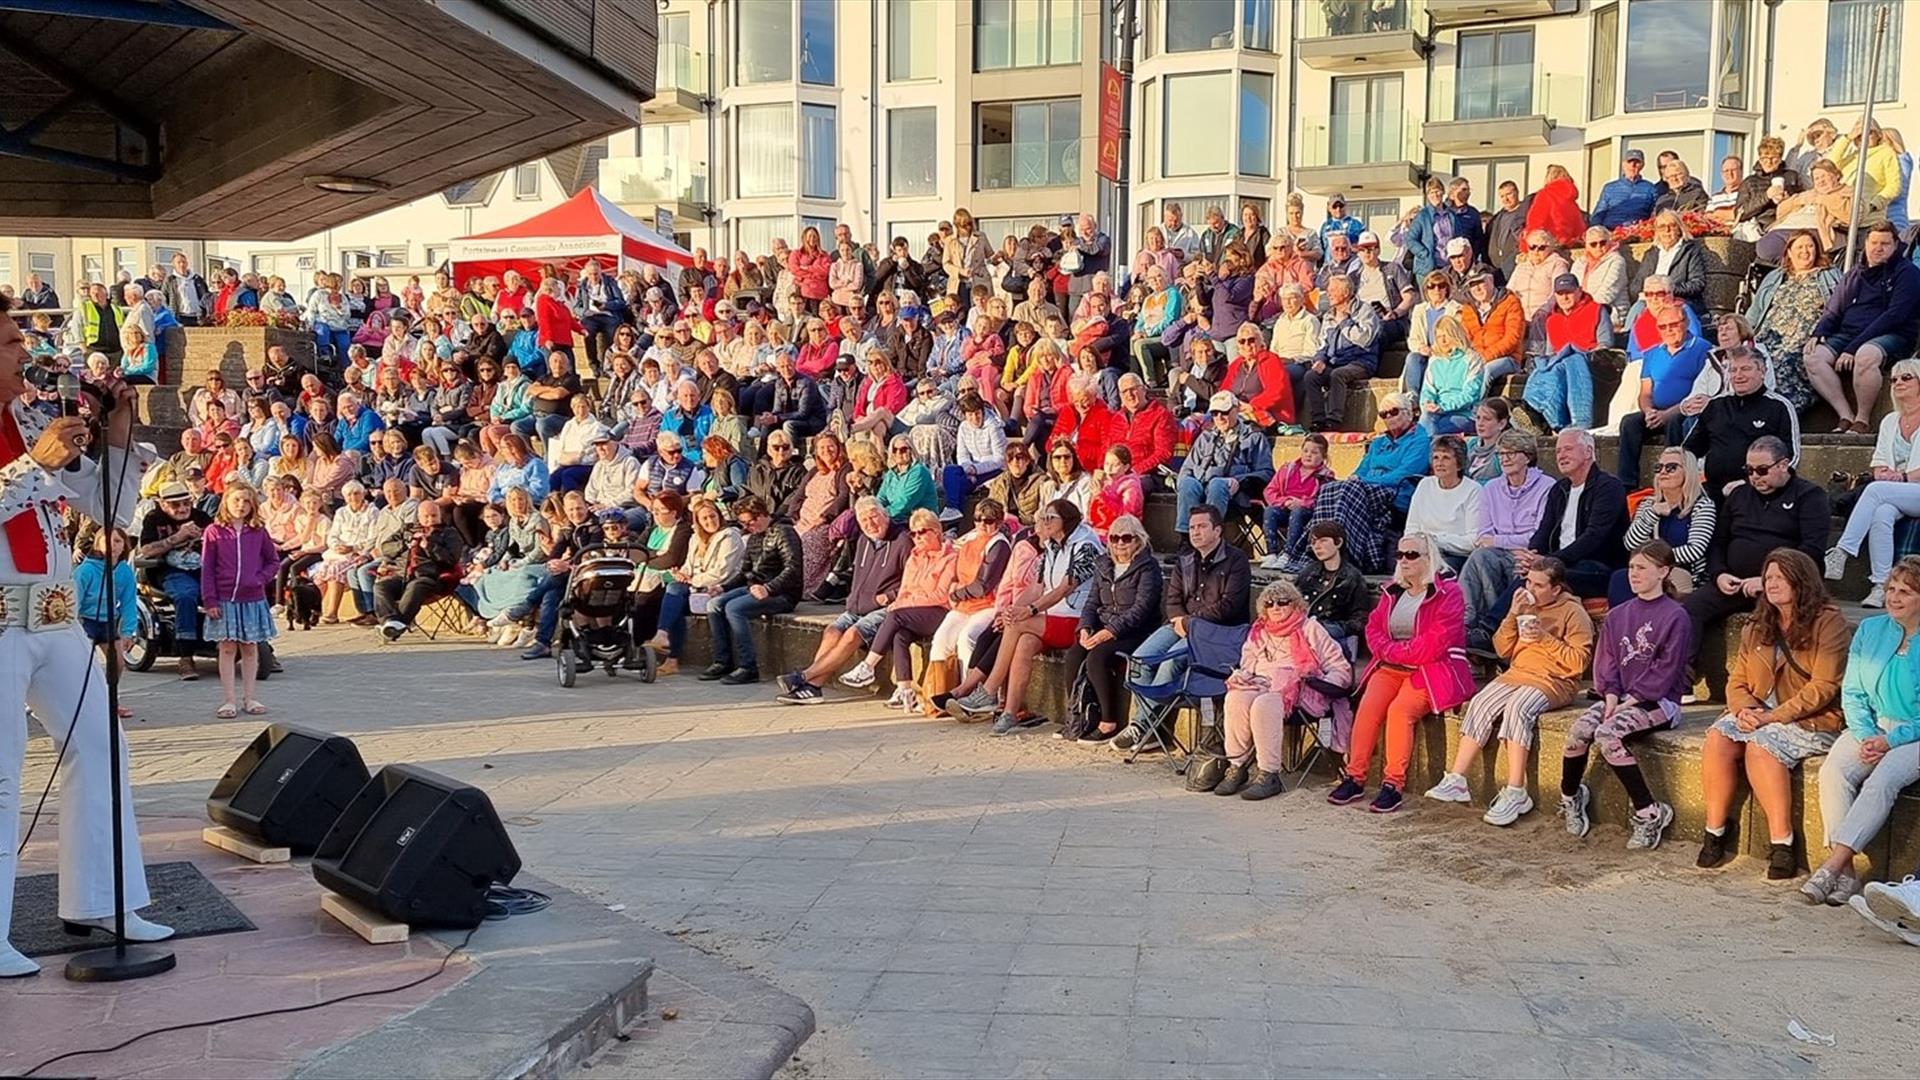 Elvis Show at Red Sails Festival with a full crowd sitting in front of him